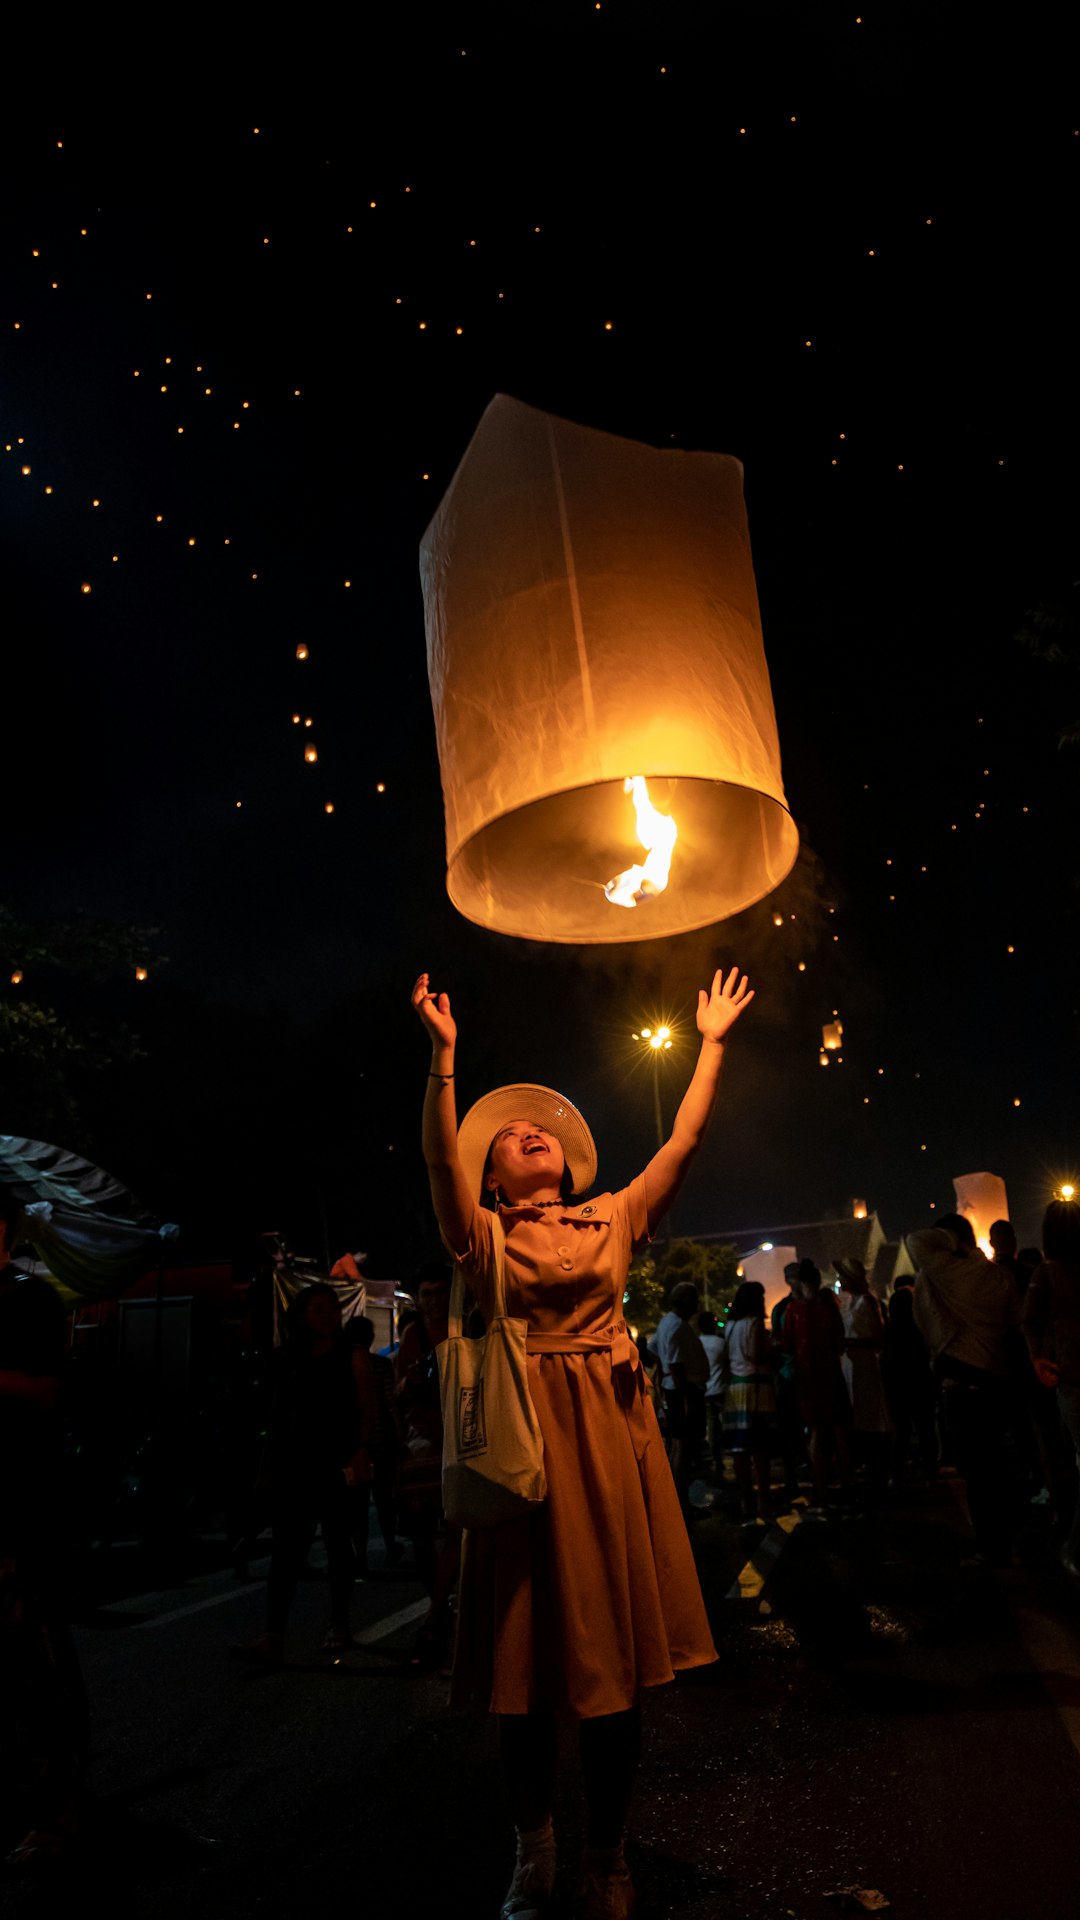 During Loi Krathong the Festival of Lights in Chiang Mai I saw this Chinese girl (Ji Jing) suited in her skirt and wearing a hat releasing her lantern and took the chance to take the photo.